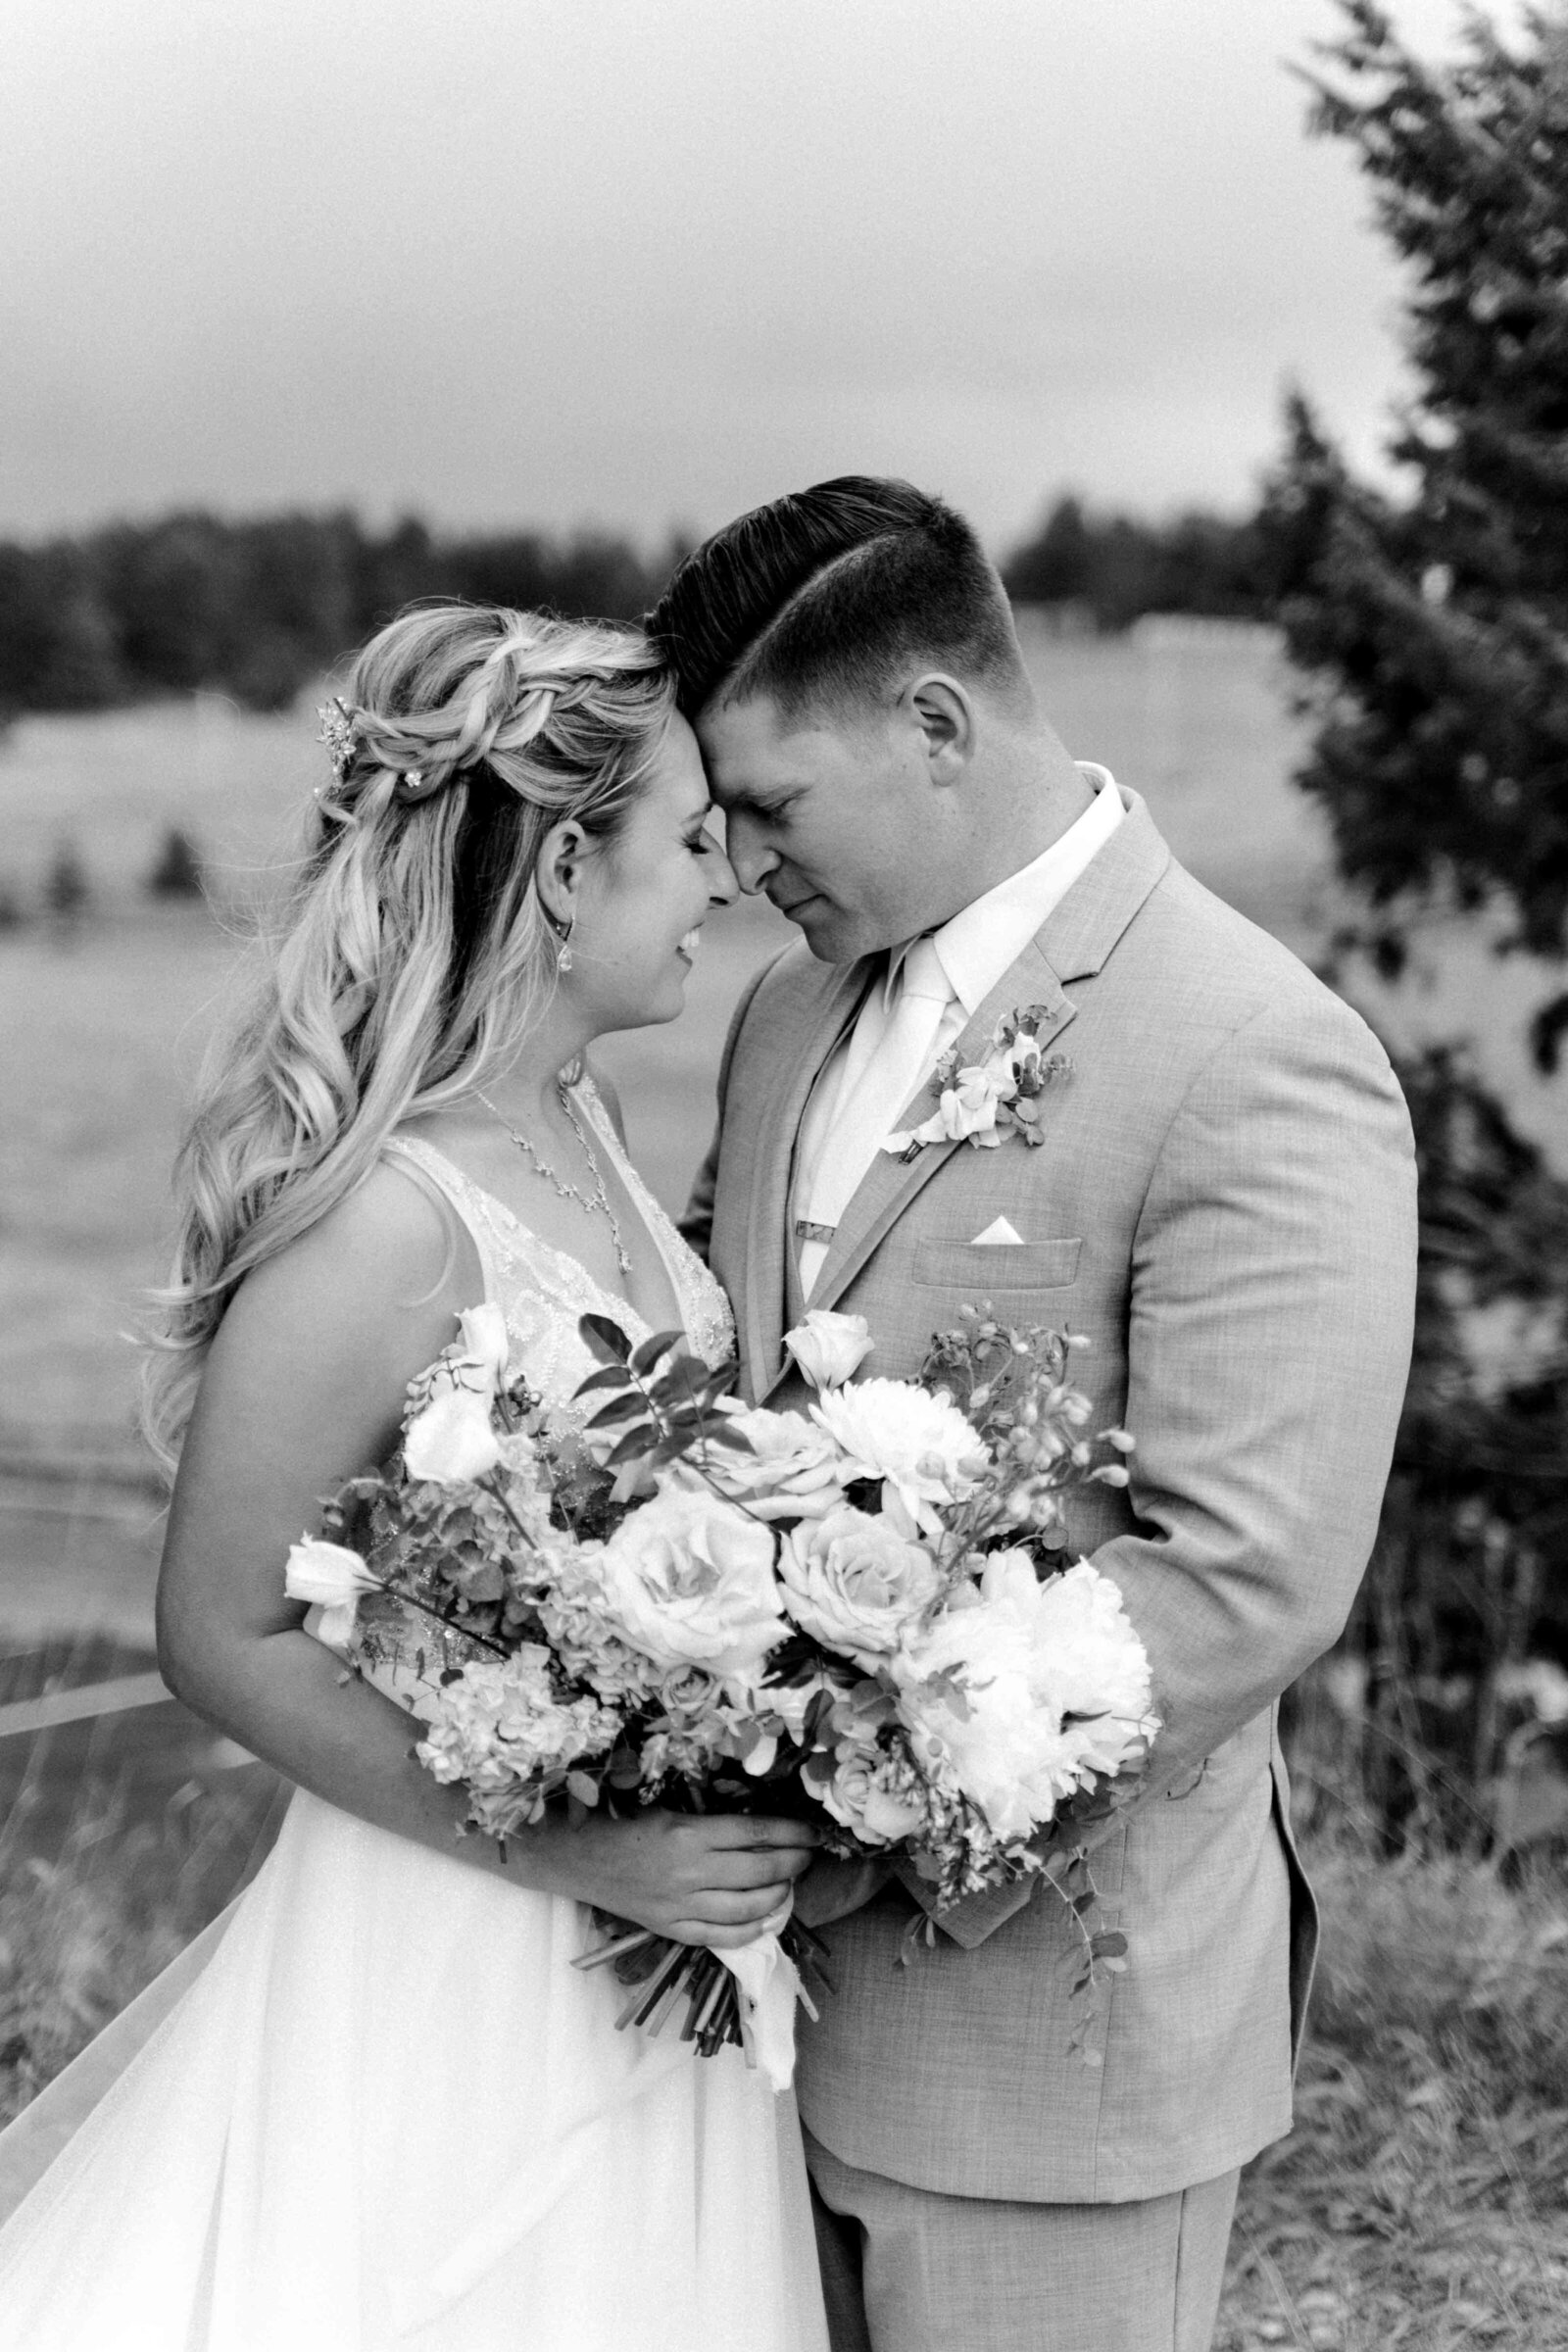 Black and white photo of bride and groom facing each other about to kiss while holding floral bouquet